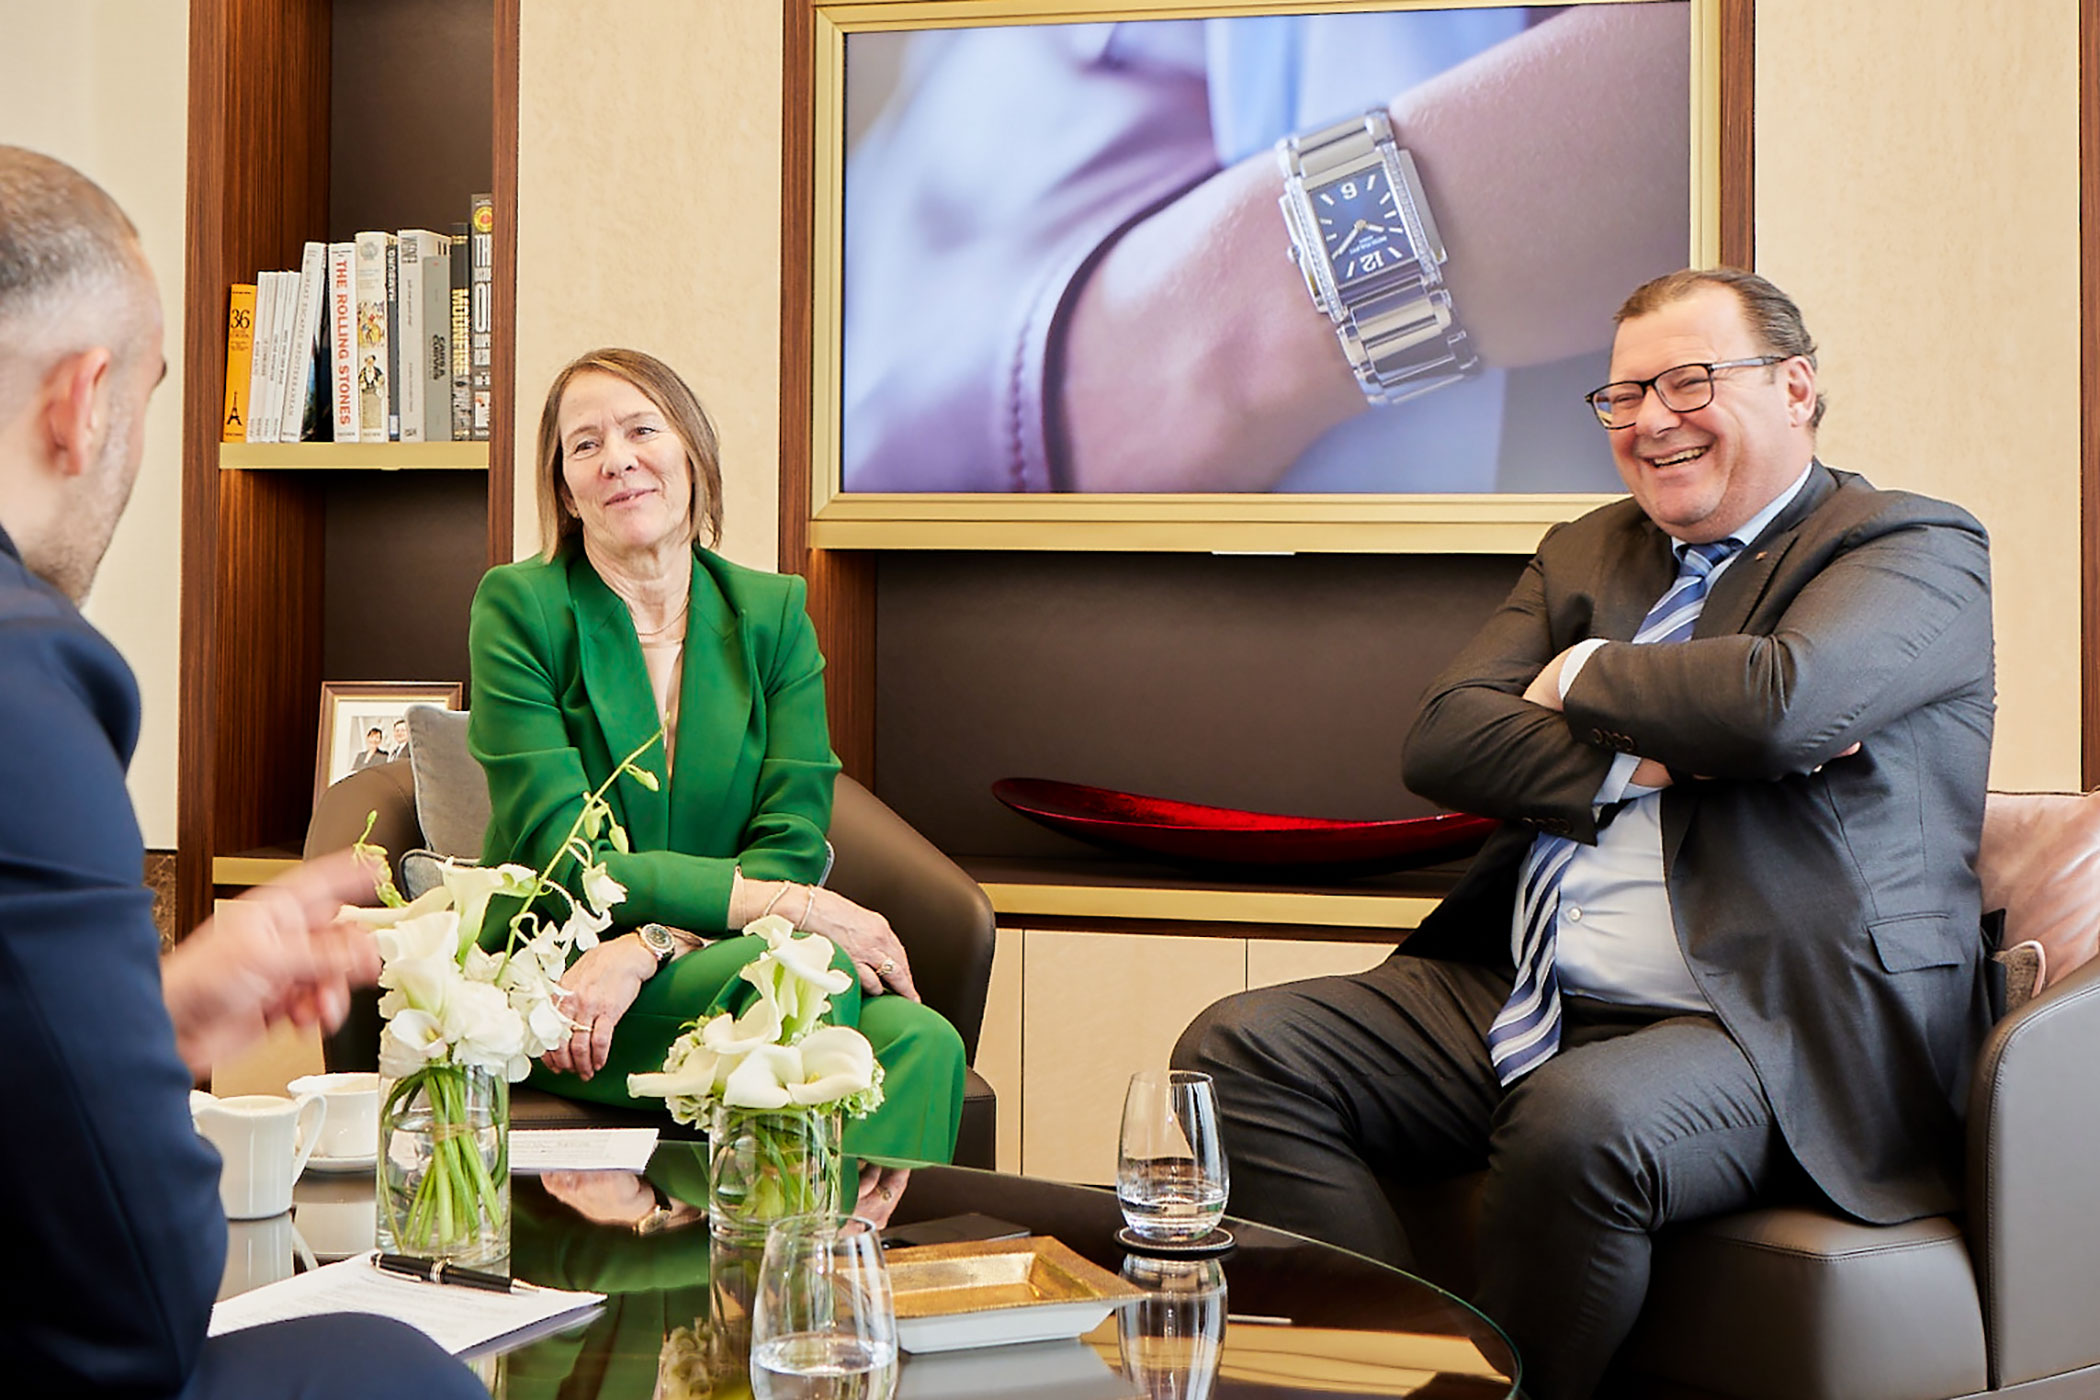 Baselworld 2016: Interview with Thierry Stern, President and